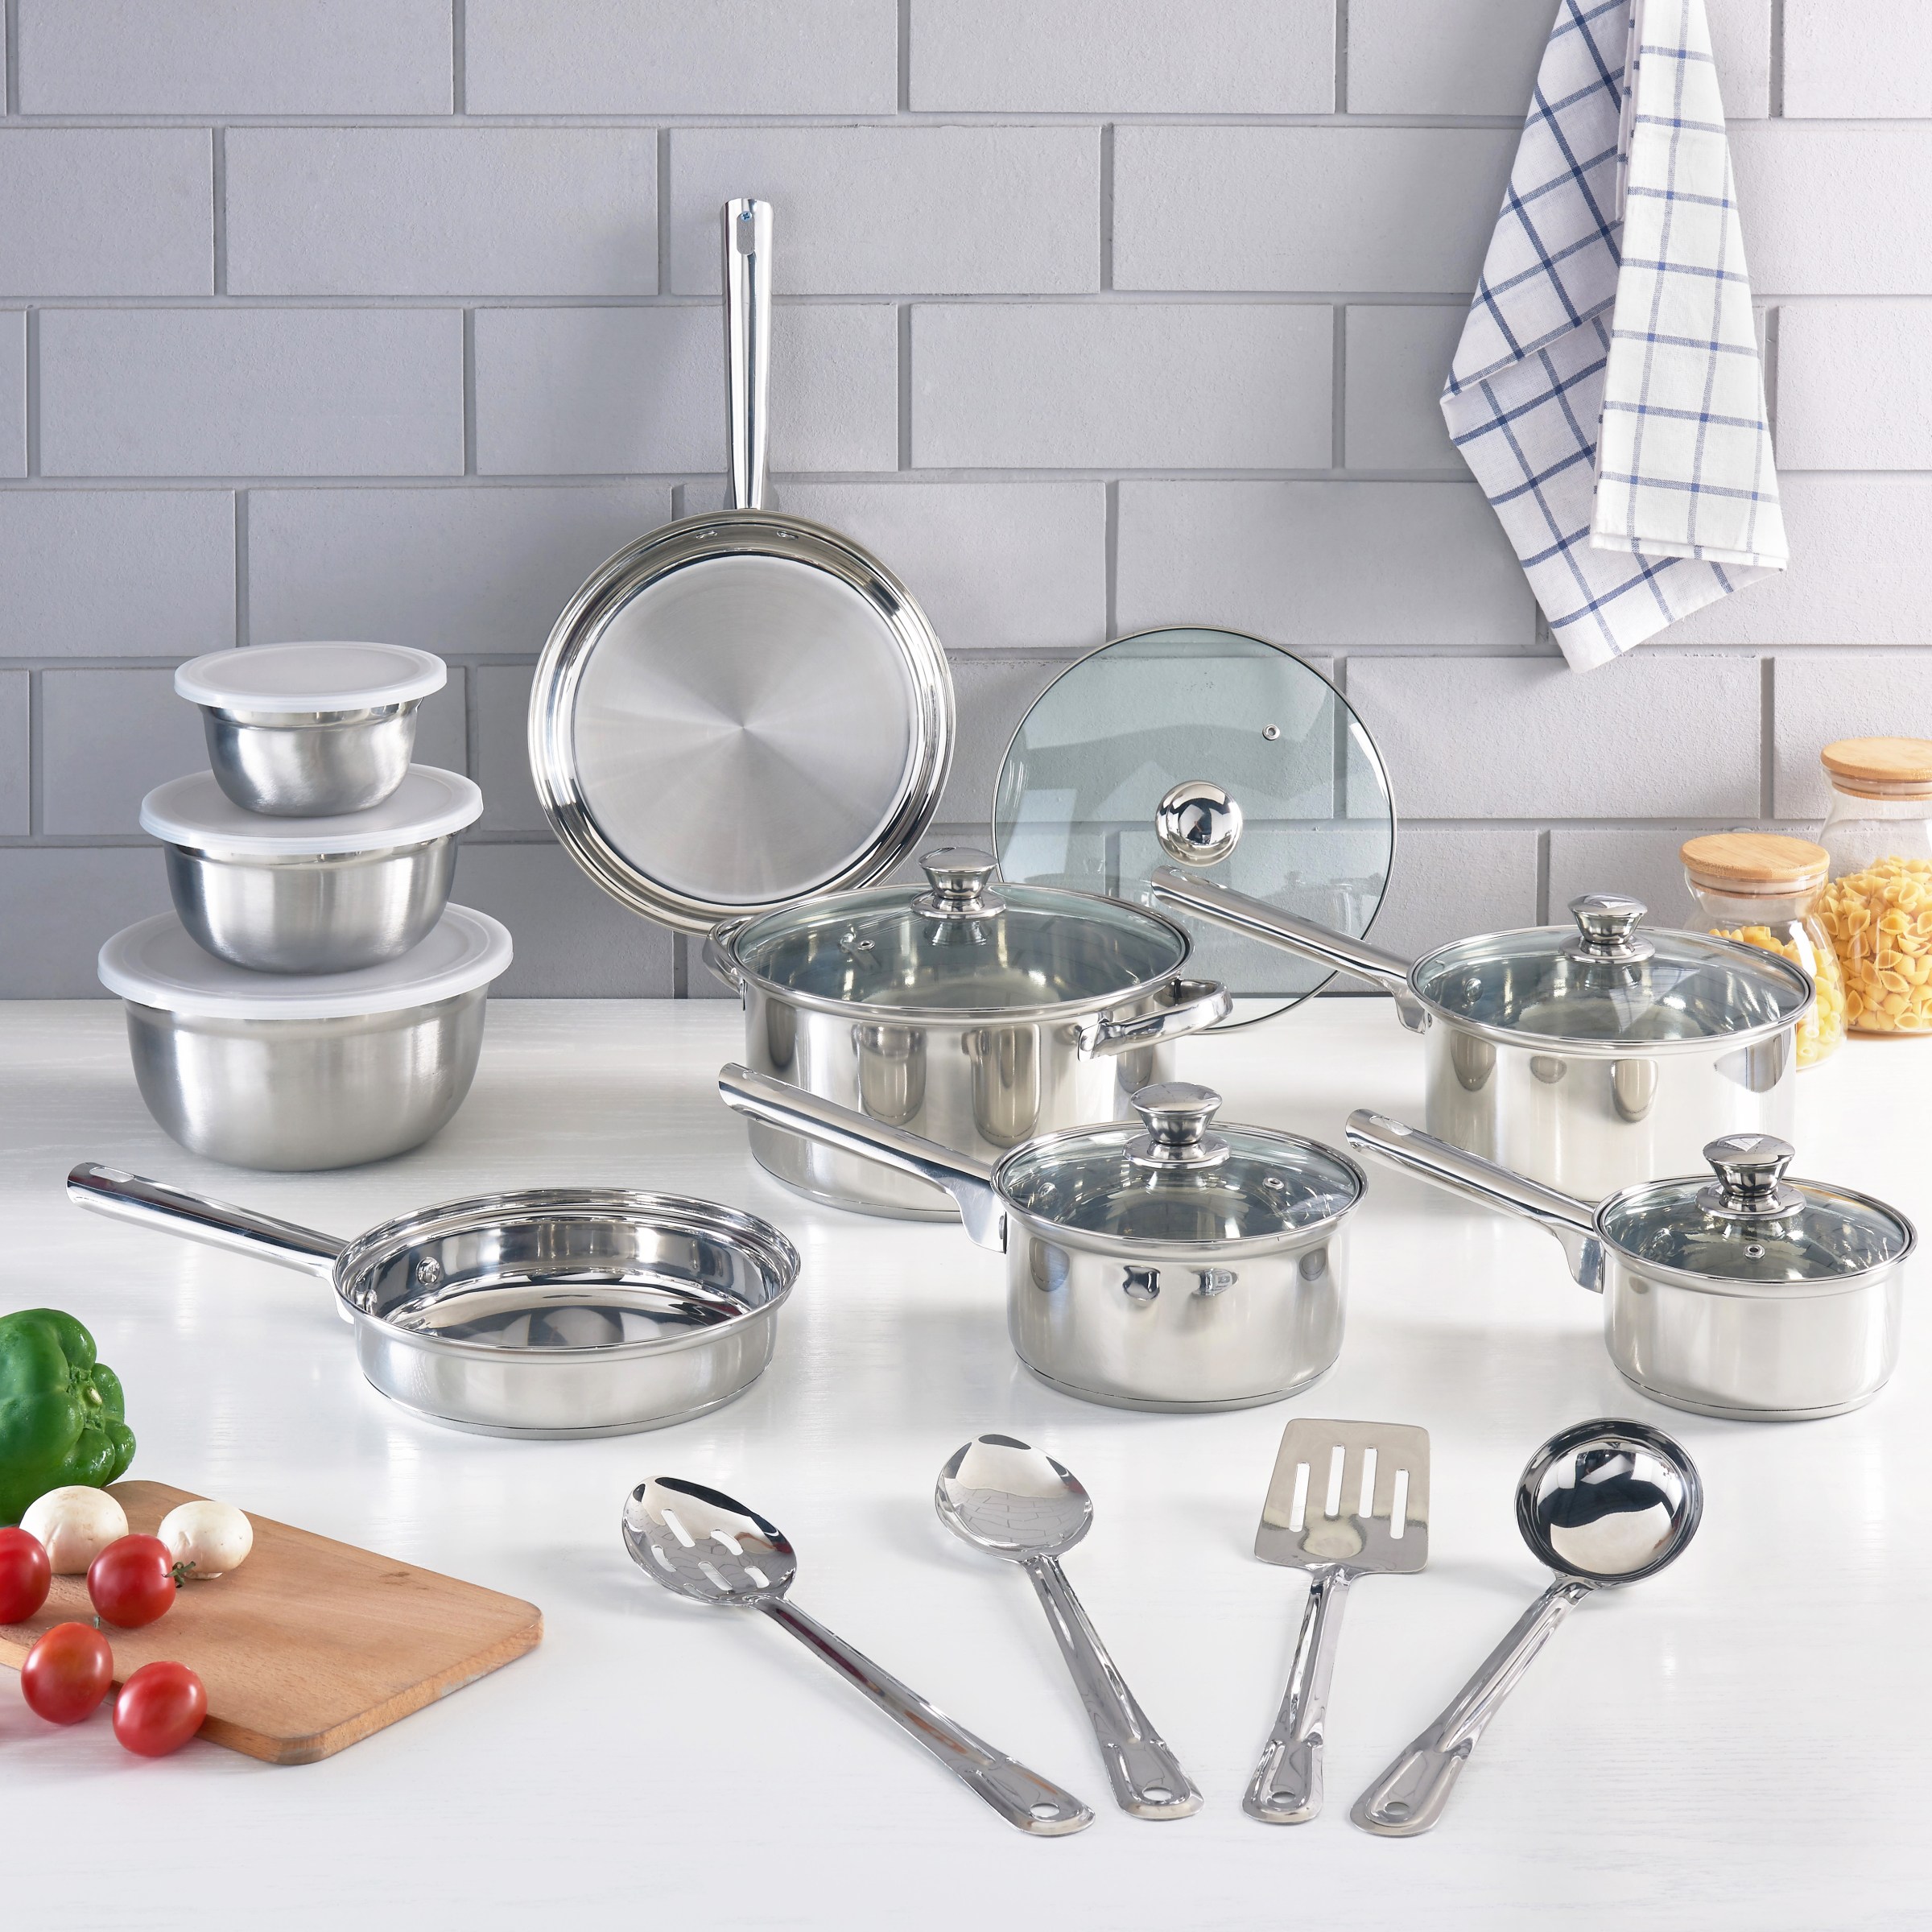 Mainstays Stainless Steel 18 Piece Cookware Set, with Kitchen Tools and Mixing Bowls - image 2 of 12